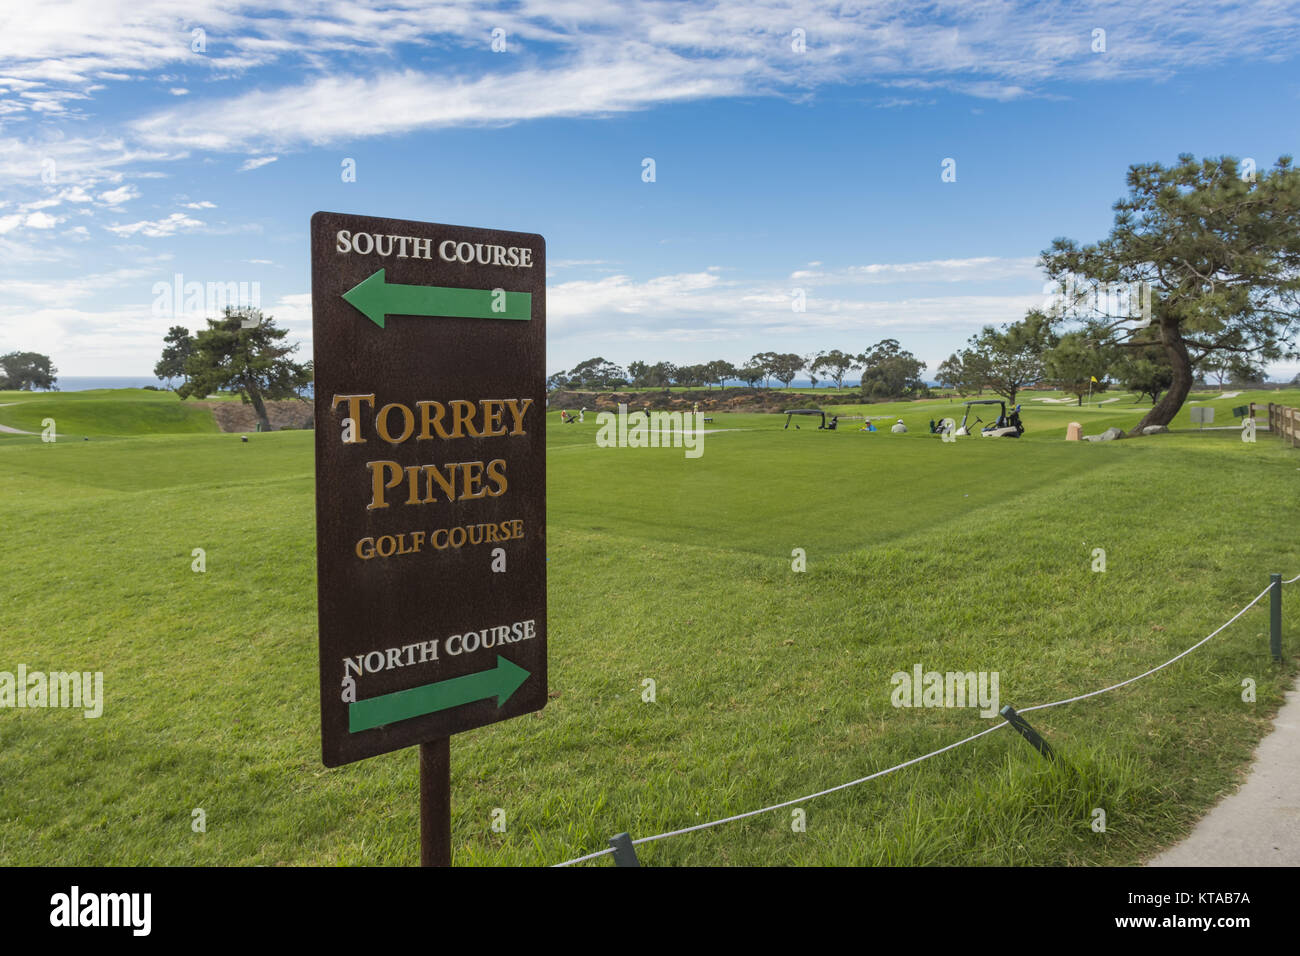 LA JOLLA, CALIFORNIA, USA - NOVEMBER 6, 2017: The North Course and South Course sign on the first tee of Torrey Pines golf course near San Diego. Stock Photo